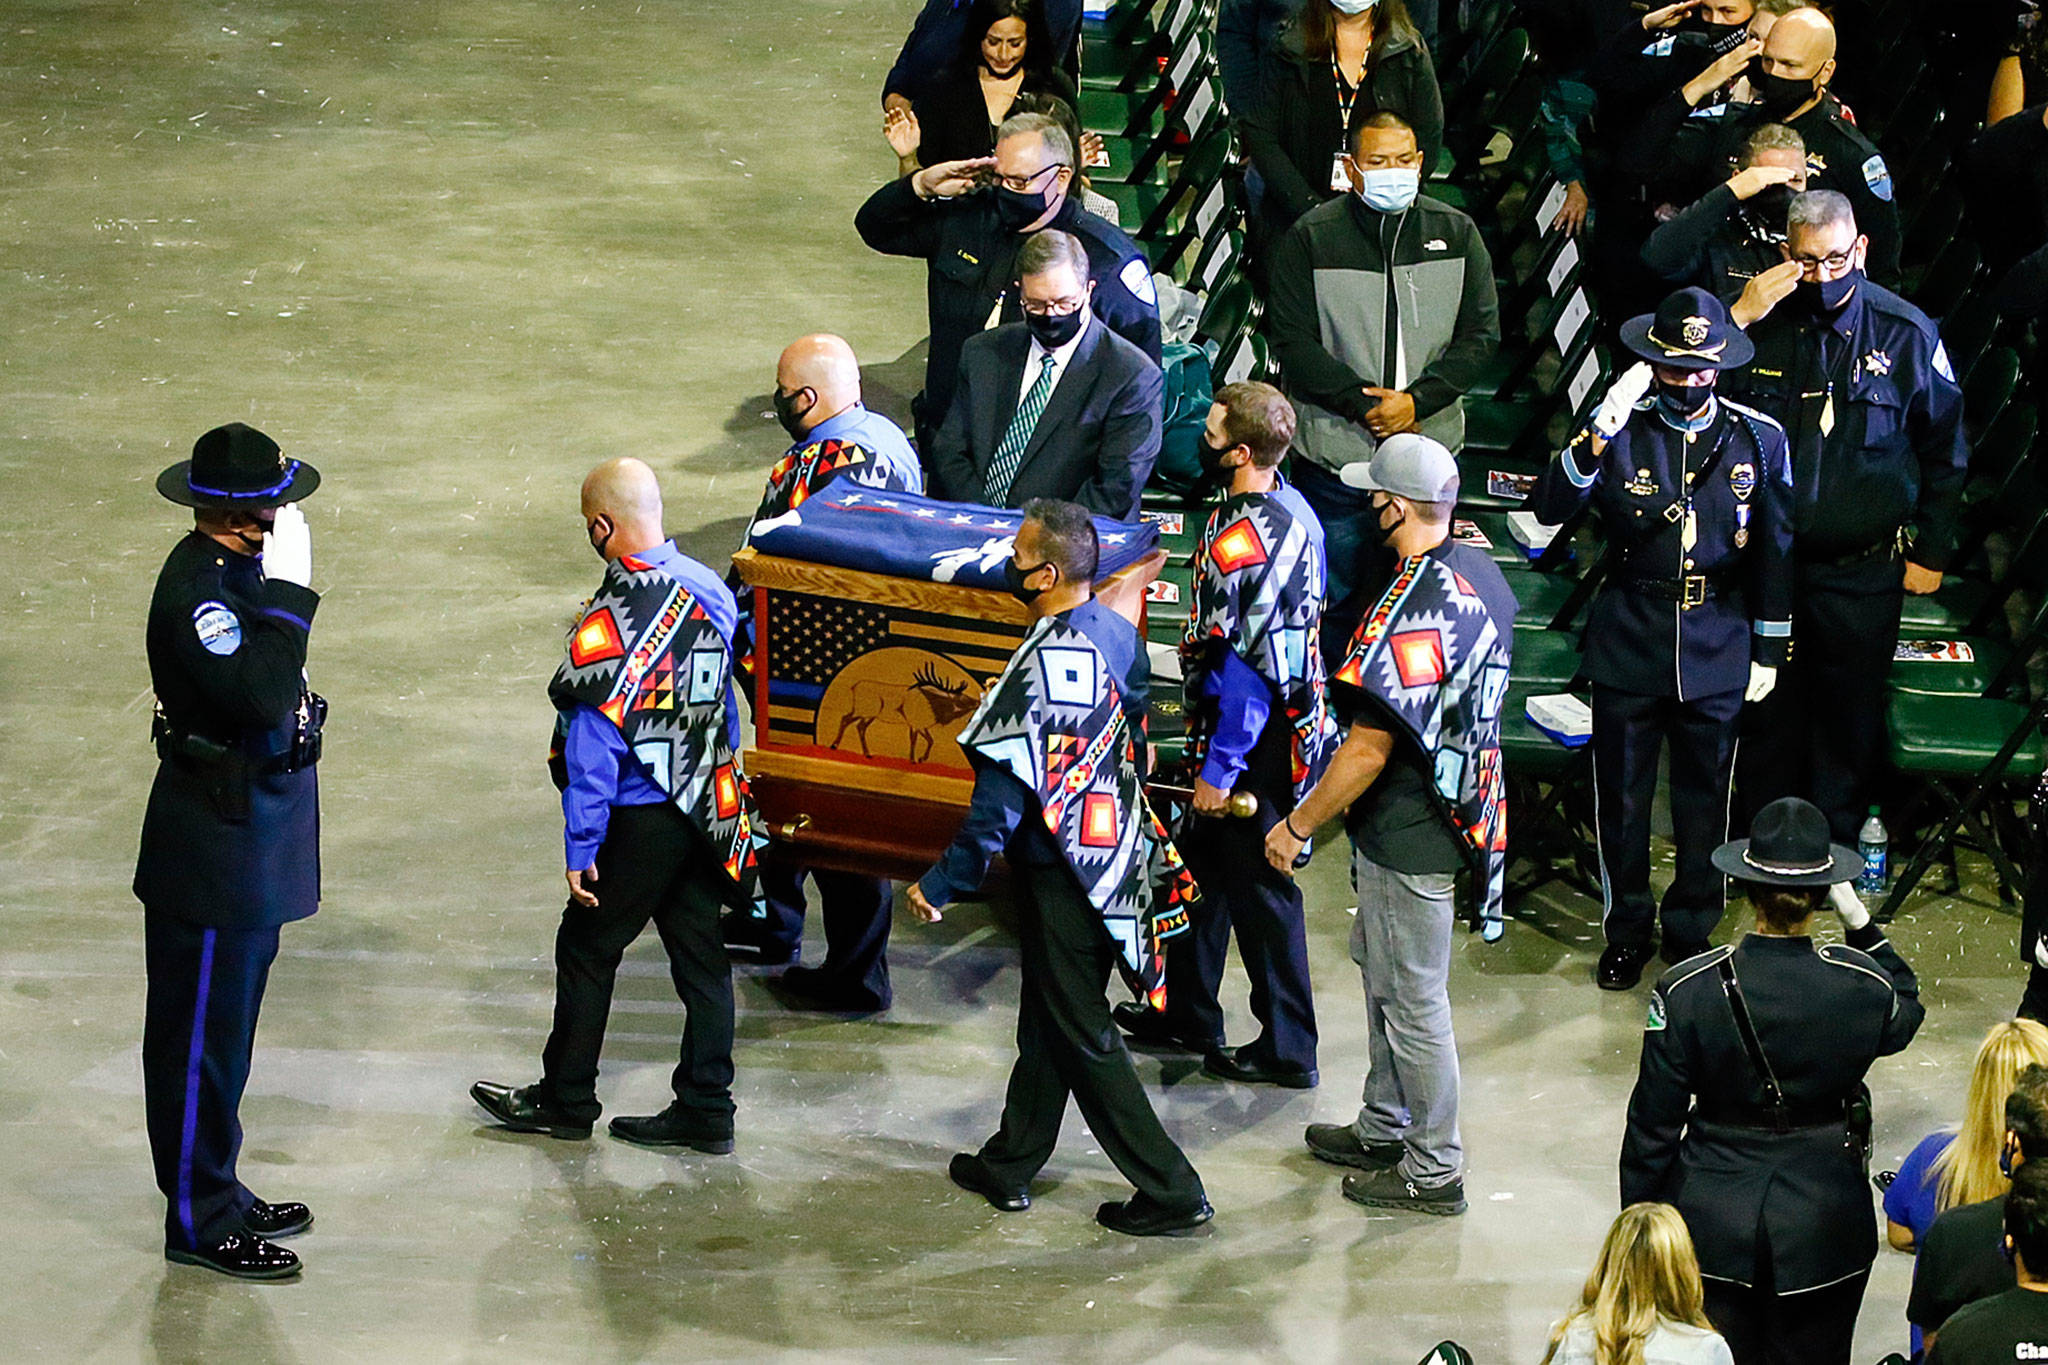 The symbolic remains of Officer Charlie Joe Cortez is carried in to start the memorial service for Officer Cortez Tuesday afternoon at the Angel of the Winds Arena in Everett on August 17, 2021.  (Kevin Clark / The Herald)